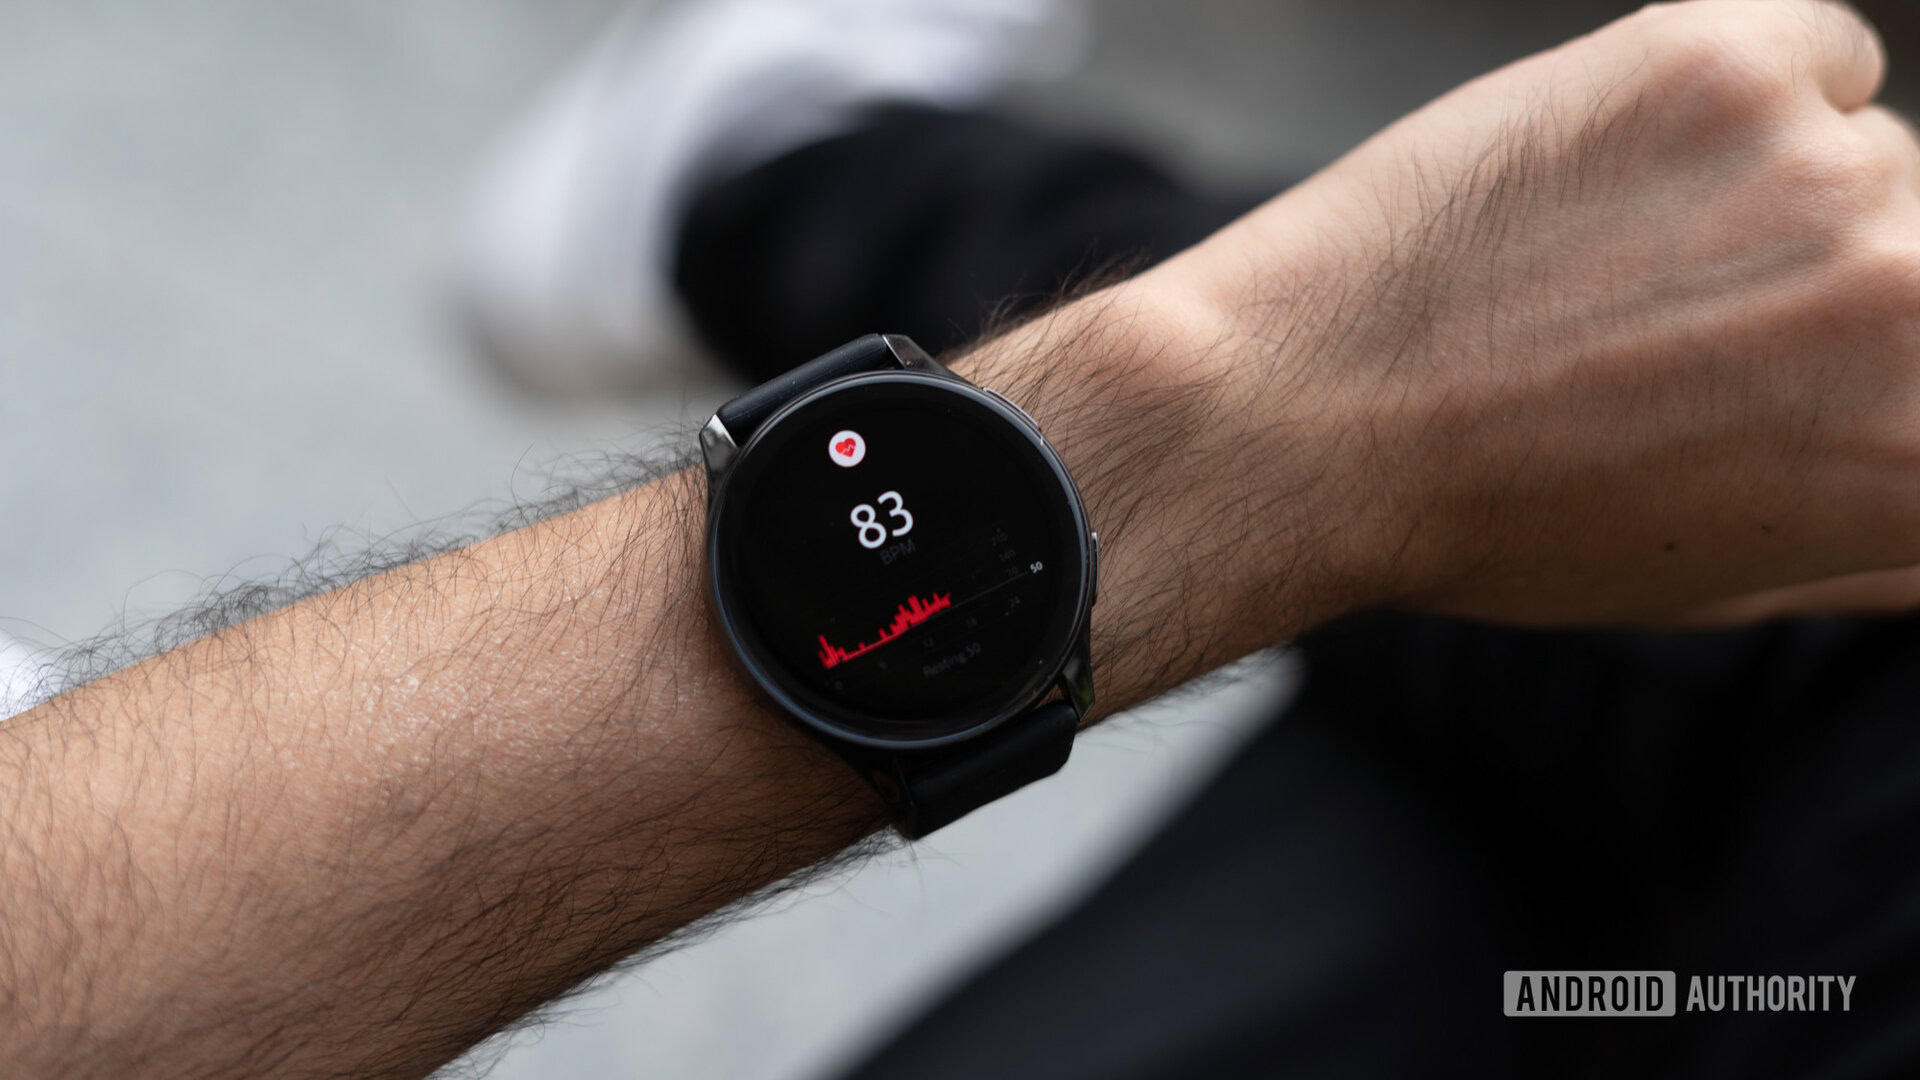 vil beslutte semester Koncentration OnePlus Watch buyer's guide: Features, reviews, specs - Android Authority